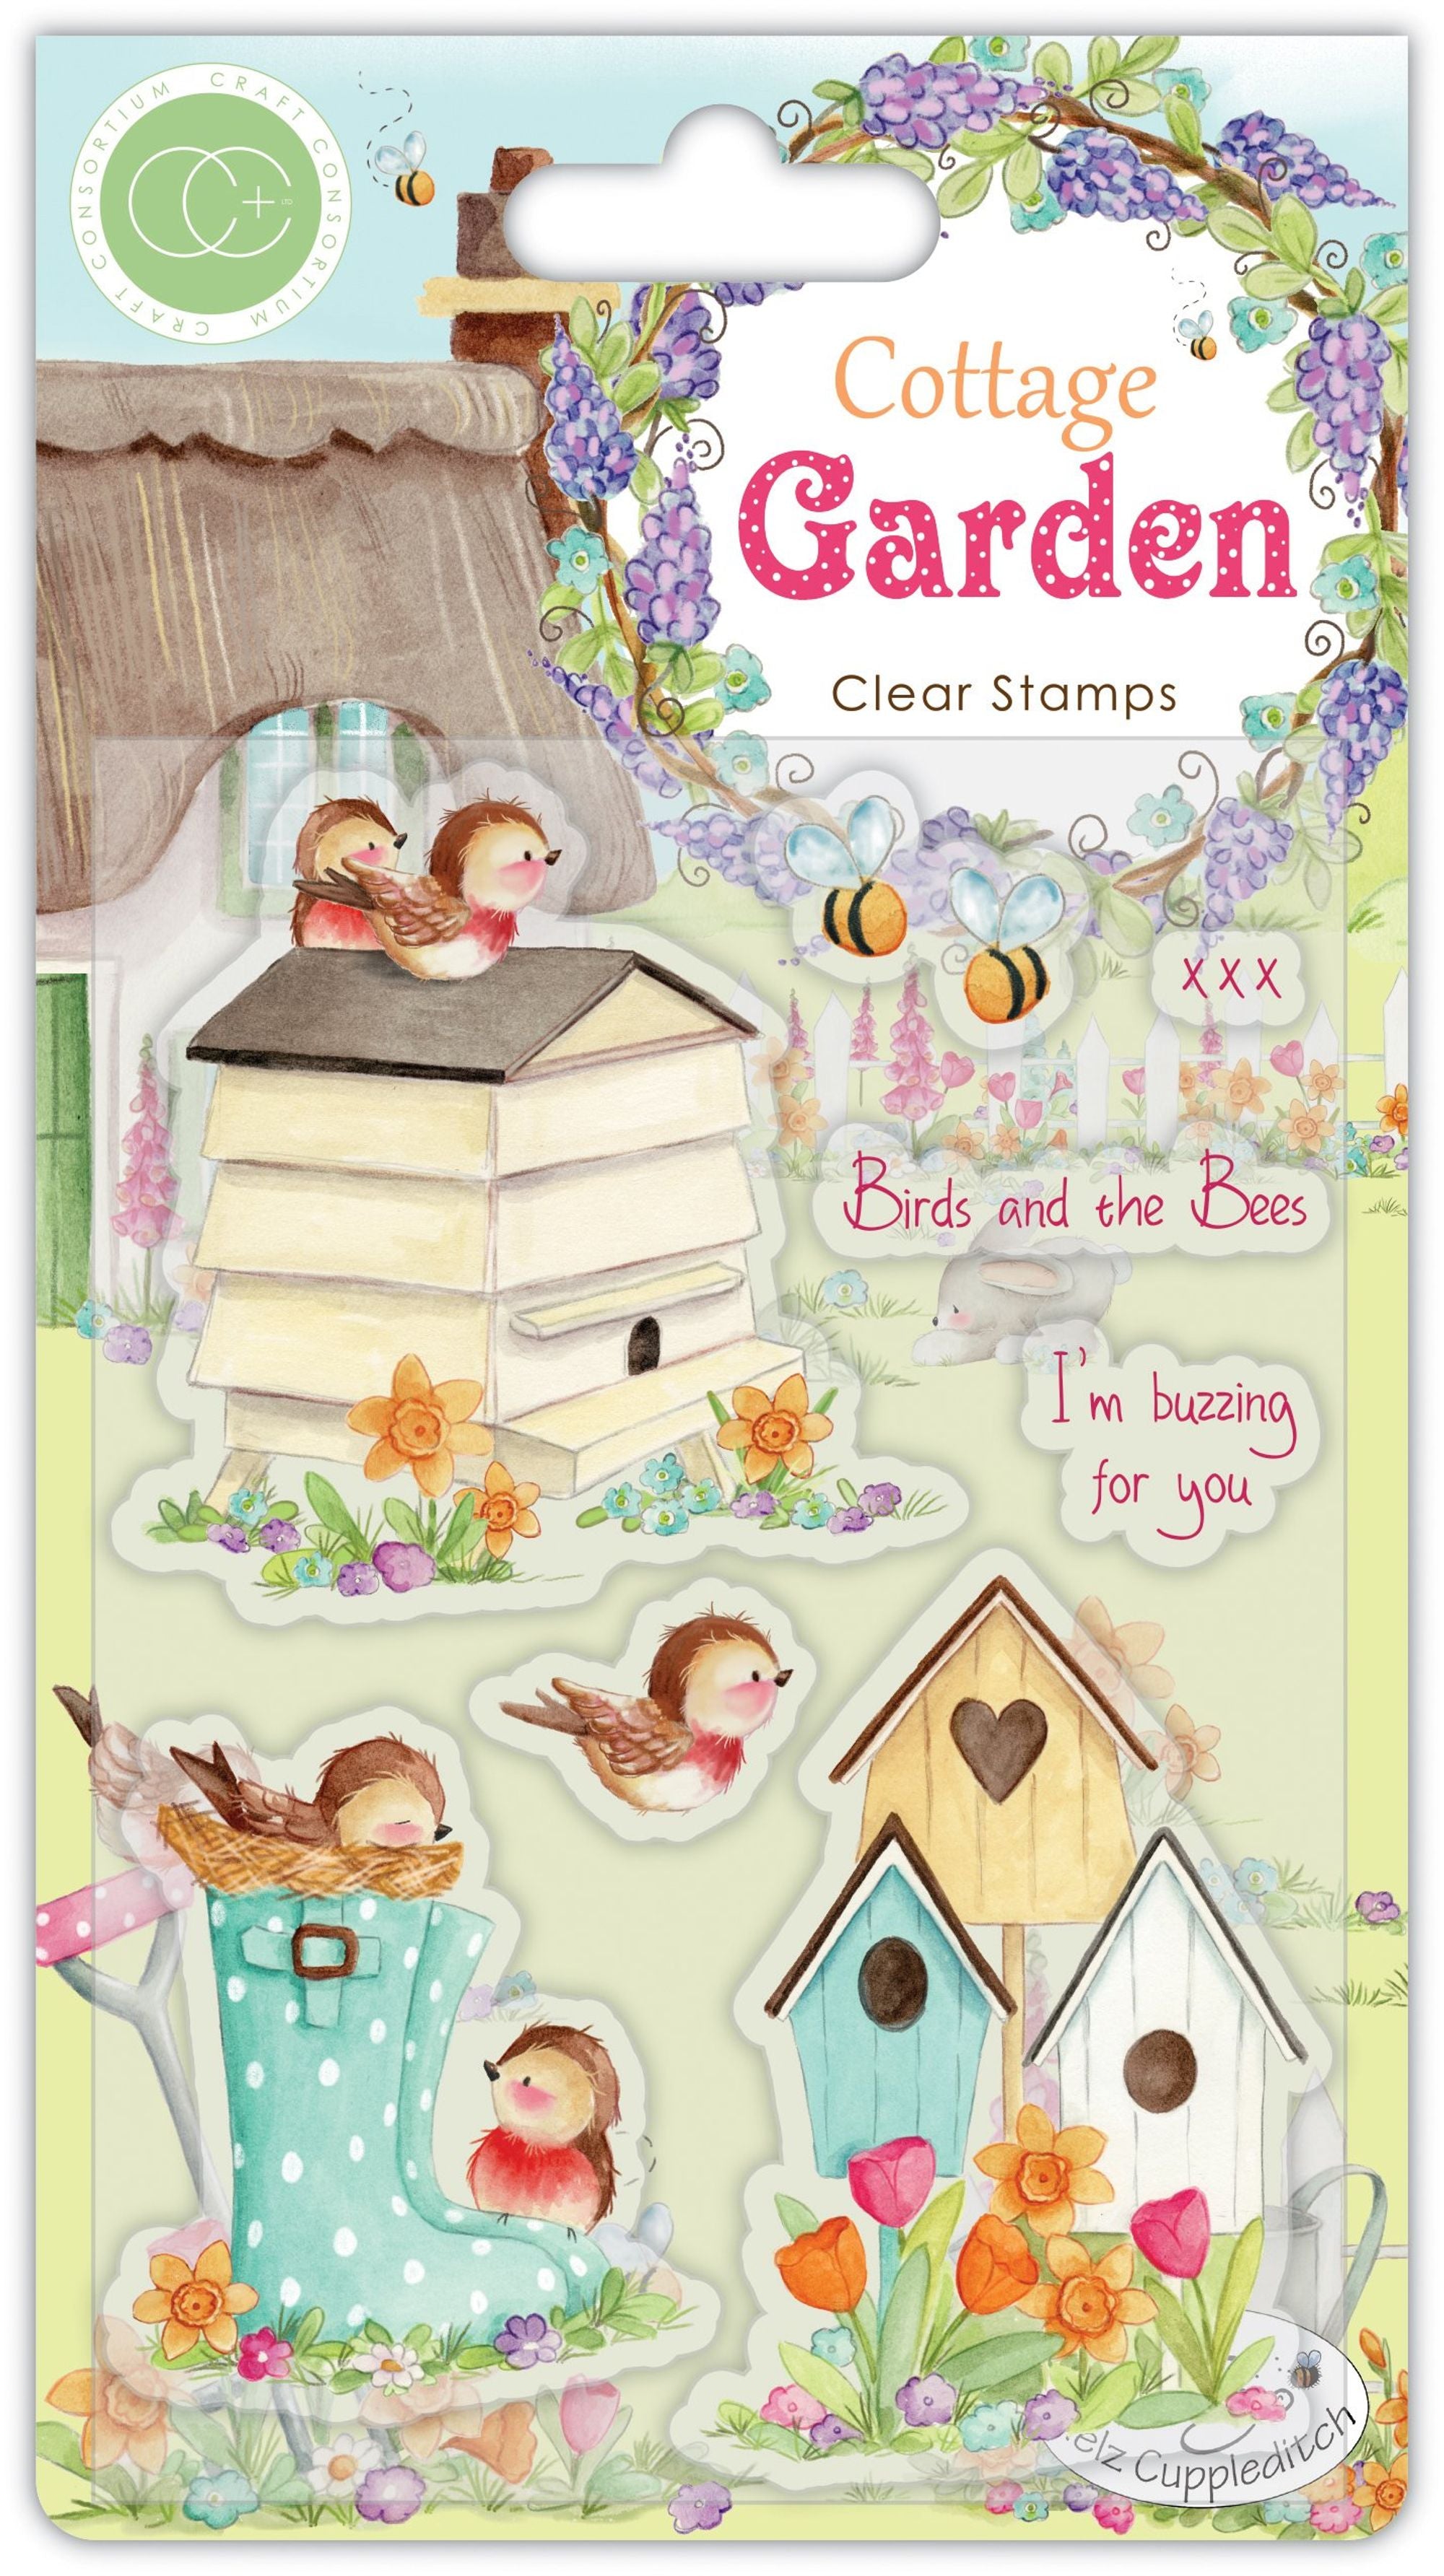 Cottage Garden - Stamp set - Birds and the Bees